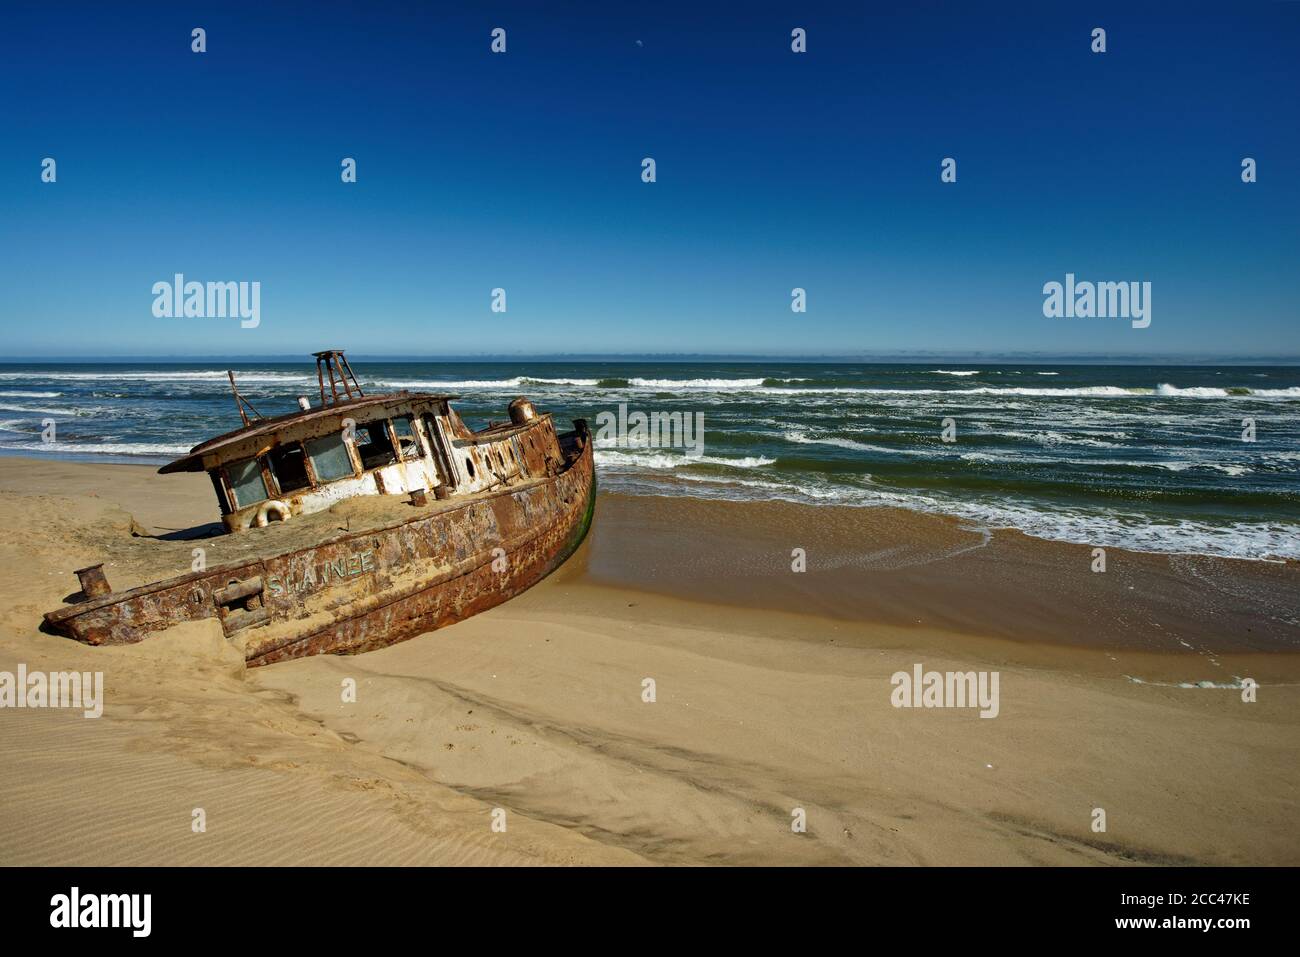 The Shawnee ship that was wrecked on the Skeleton Coast of Namibia, south west Africa. Stock Photo